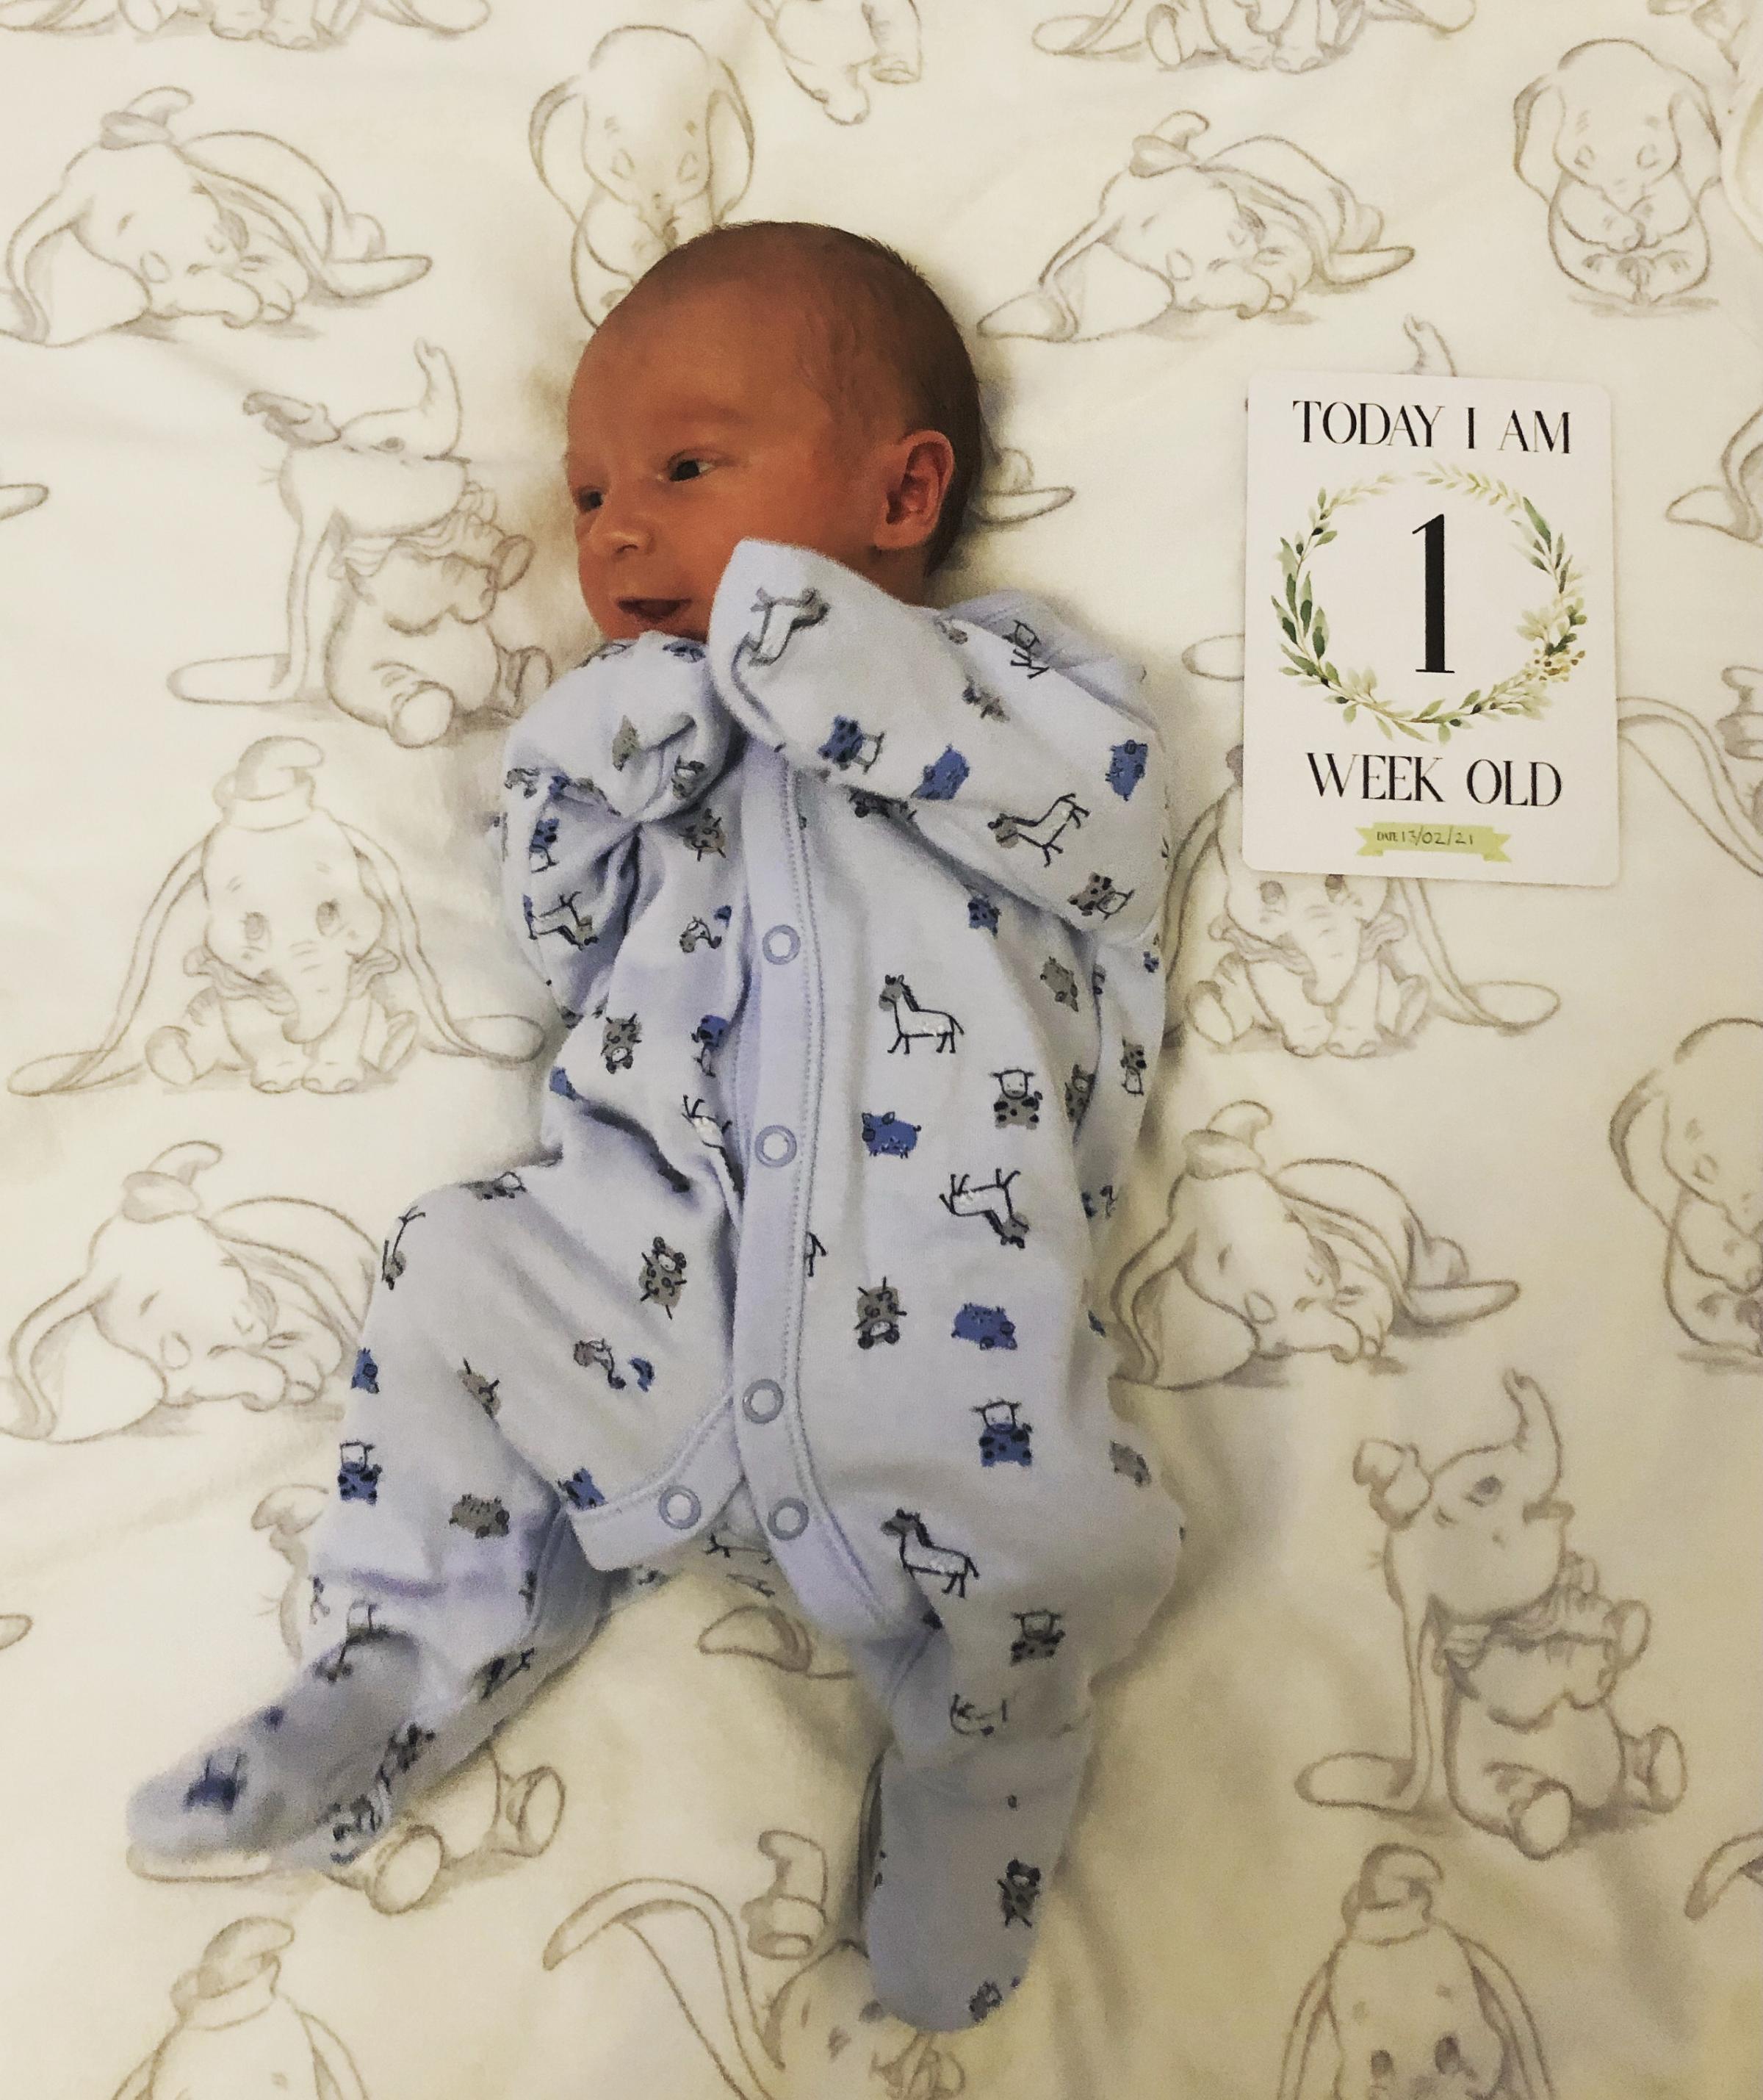 Jacob at the grand old age of one week